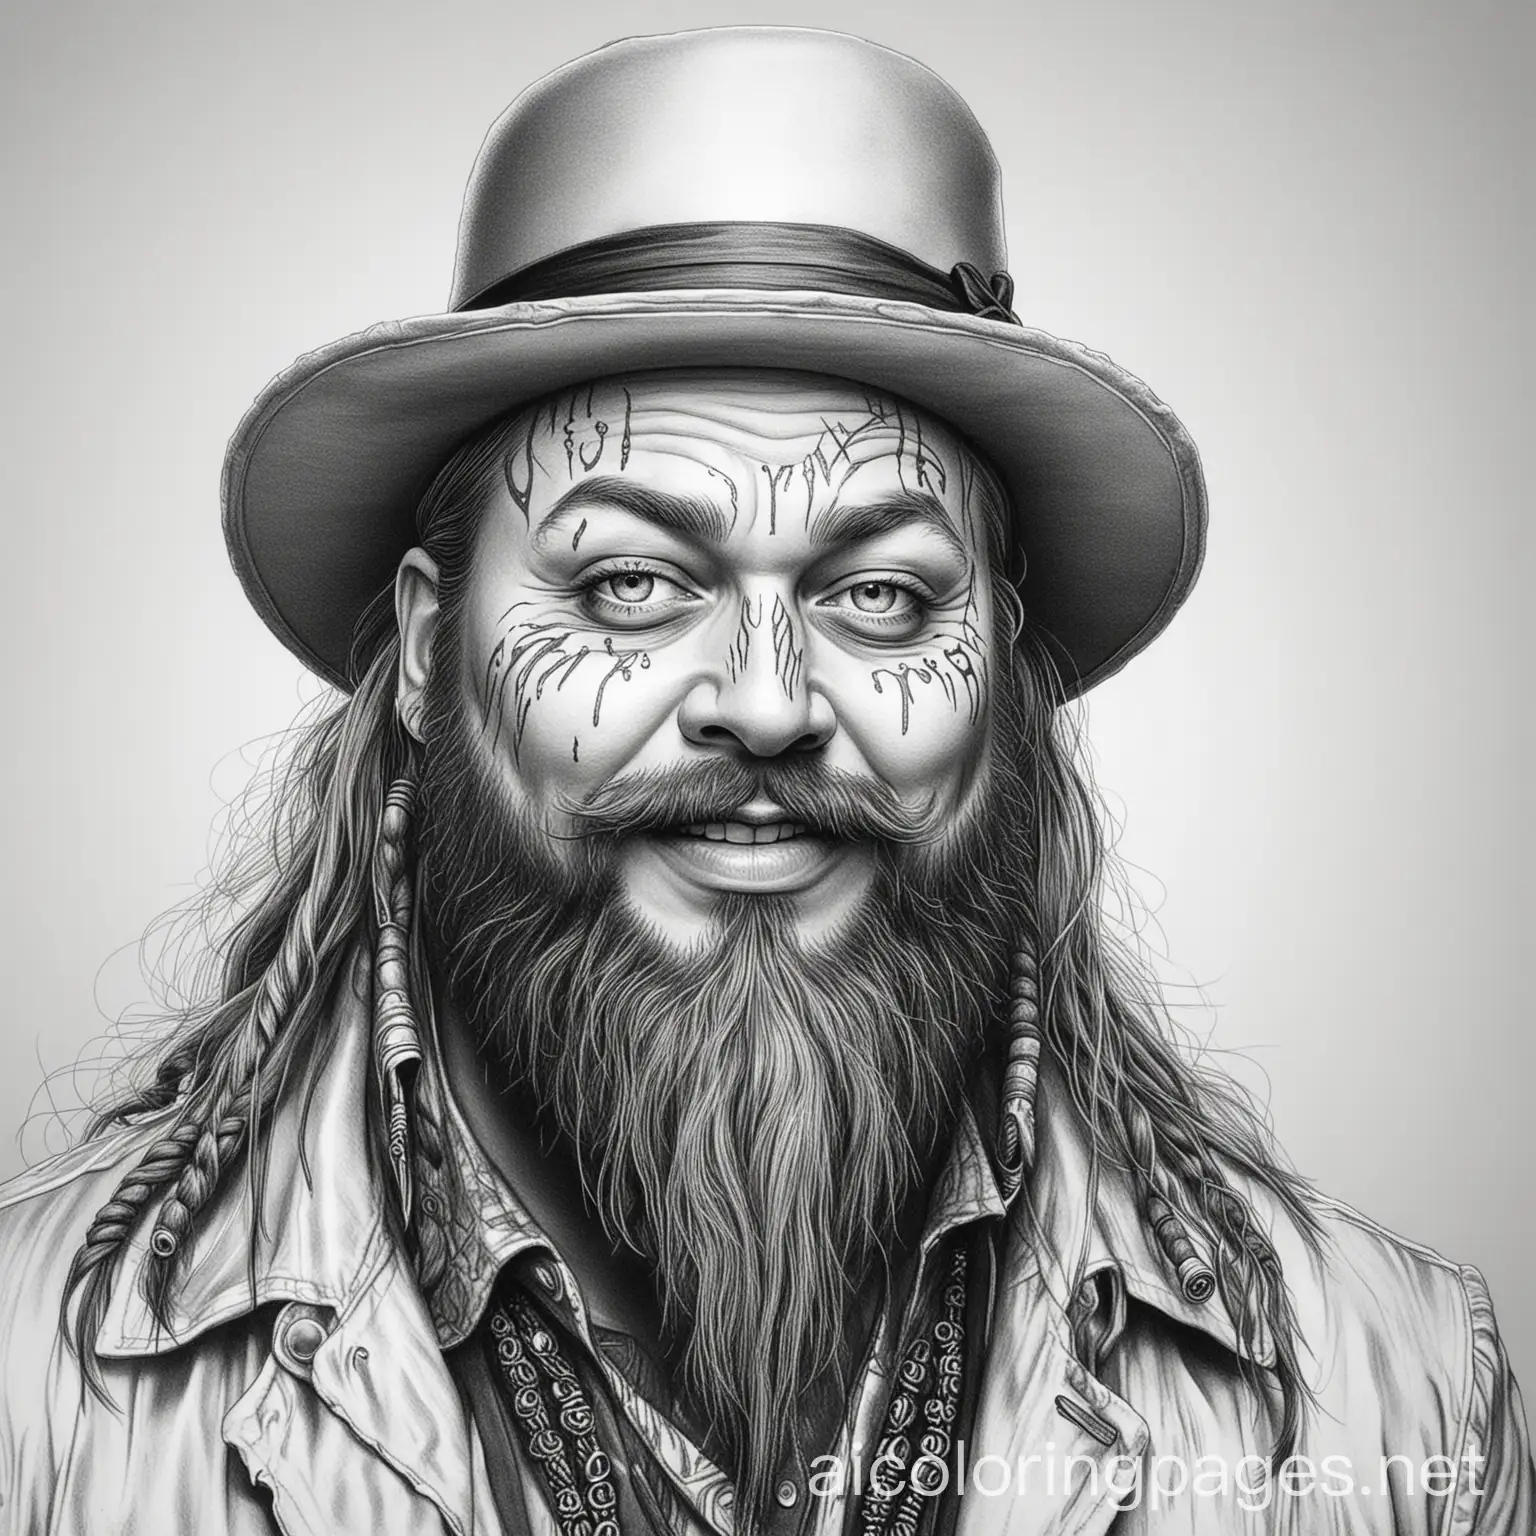 the fiend bray wyatt, Coloring Page, black and white, line art, white background, Simplicity, Ample White Space. The background of the coloring page is plain white to make it easy for young children to color within the lines. The outlines of all the subjects are easy to distinguish, making it simple for kids to color without too much difficulty